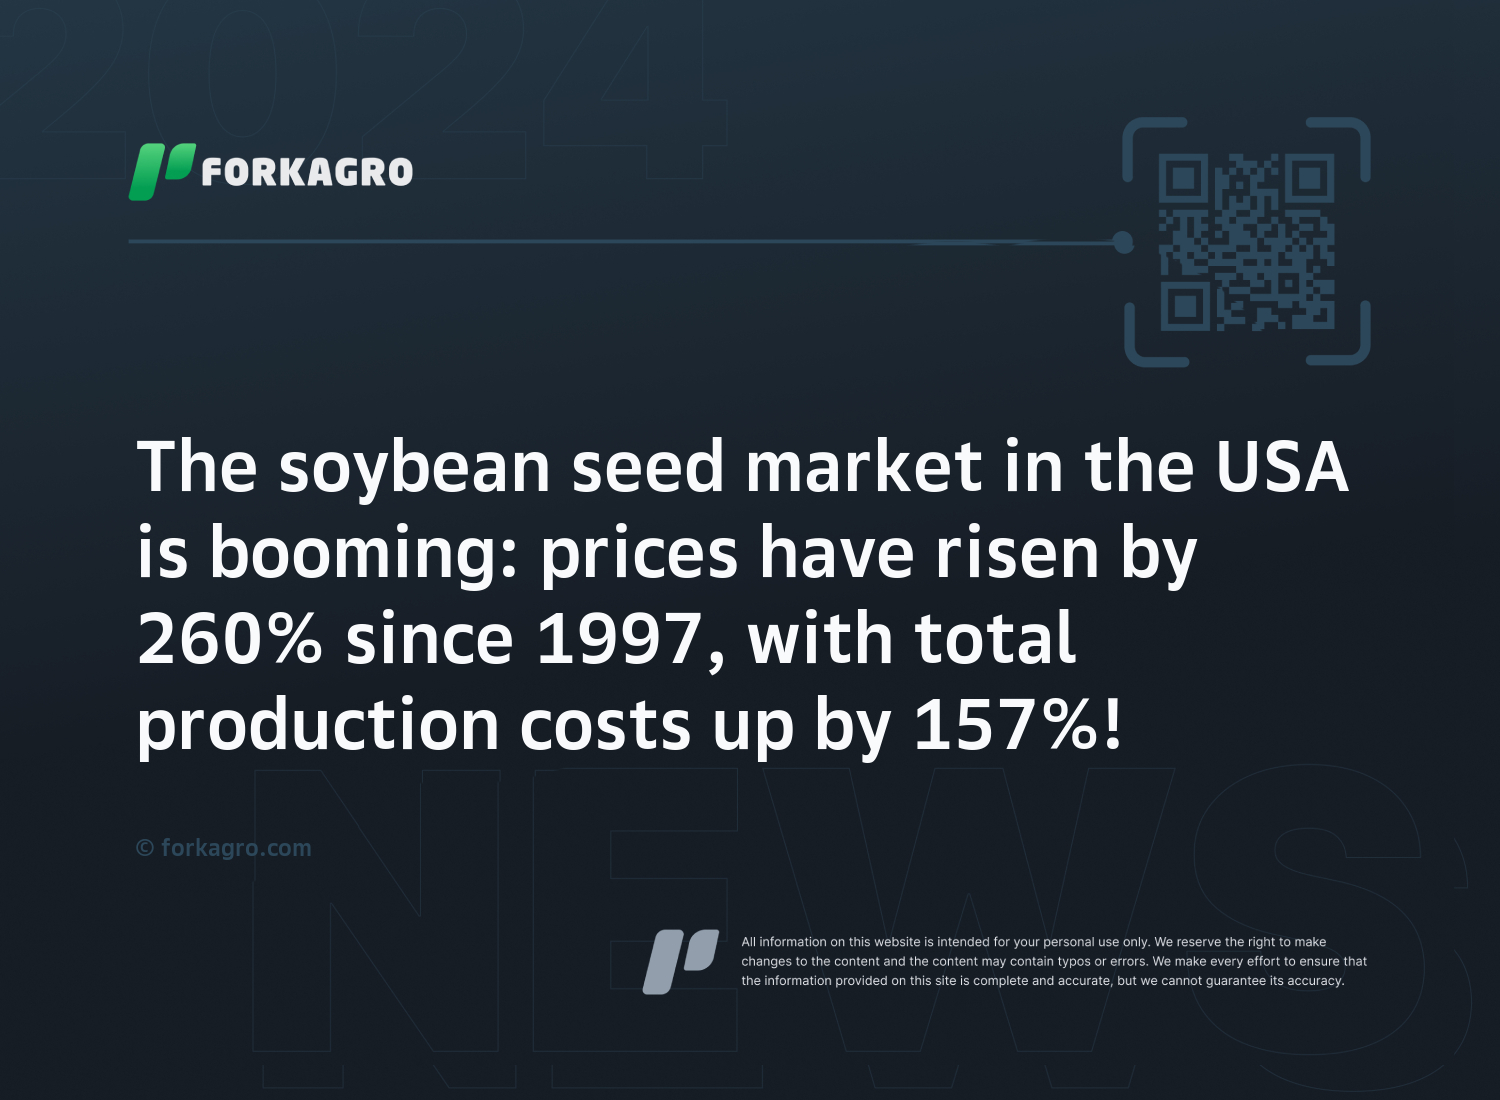 The soybean seed market in the USA is booming: prices have risen by 260% since 1997, with total production costs up by 157%!